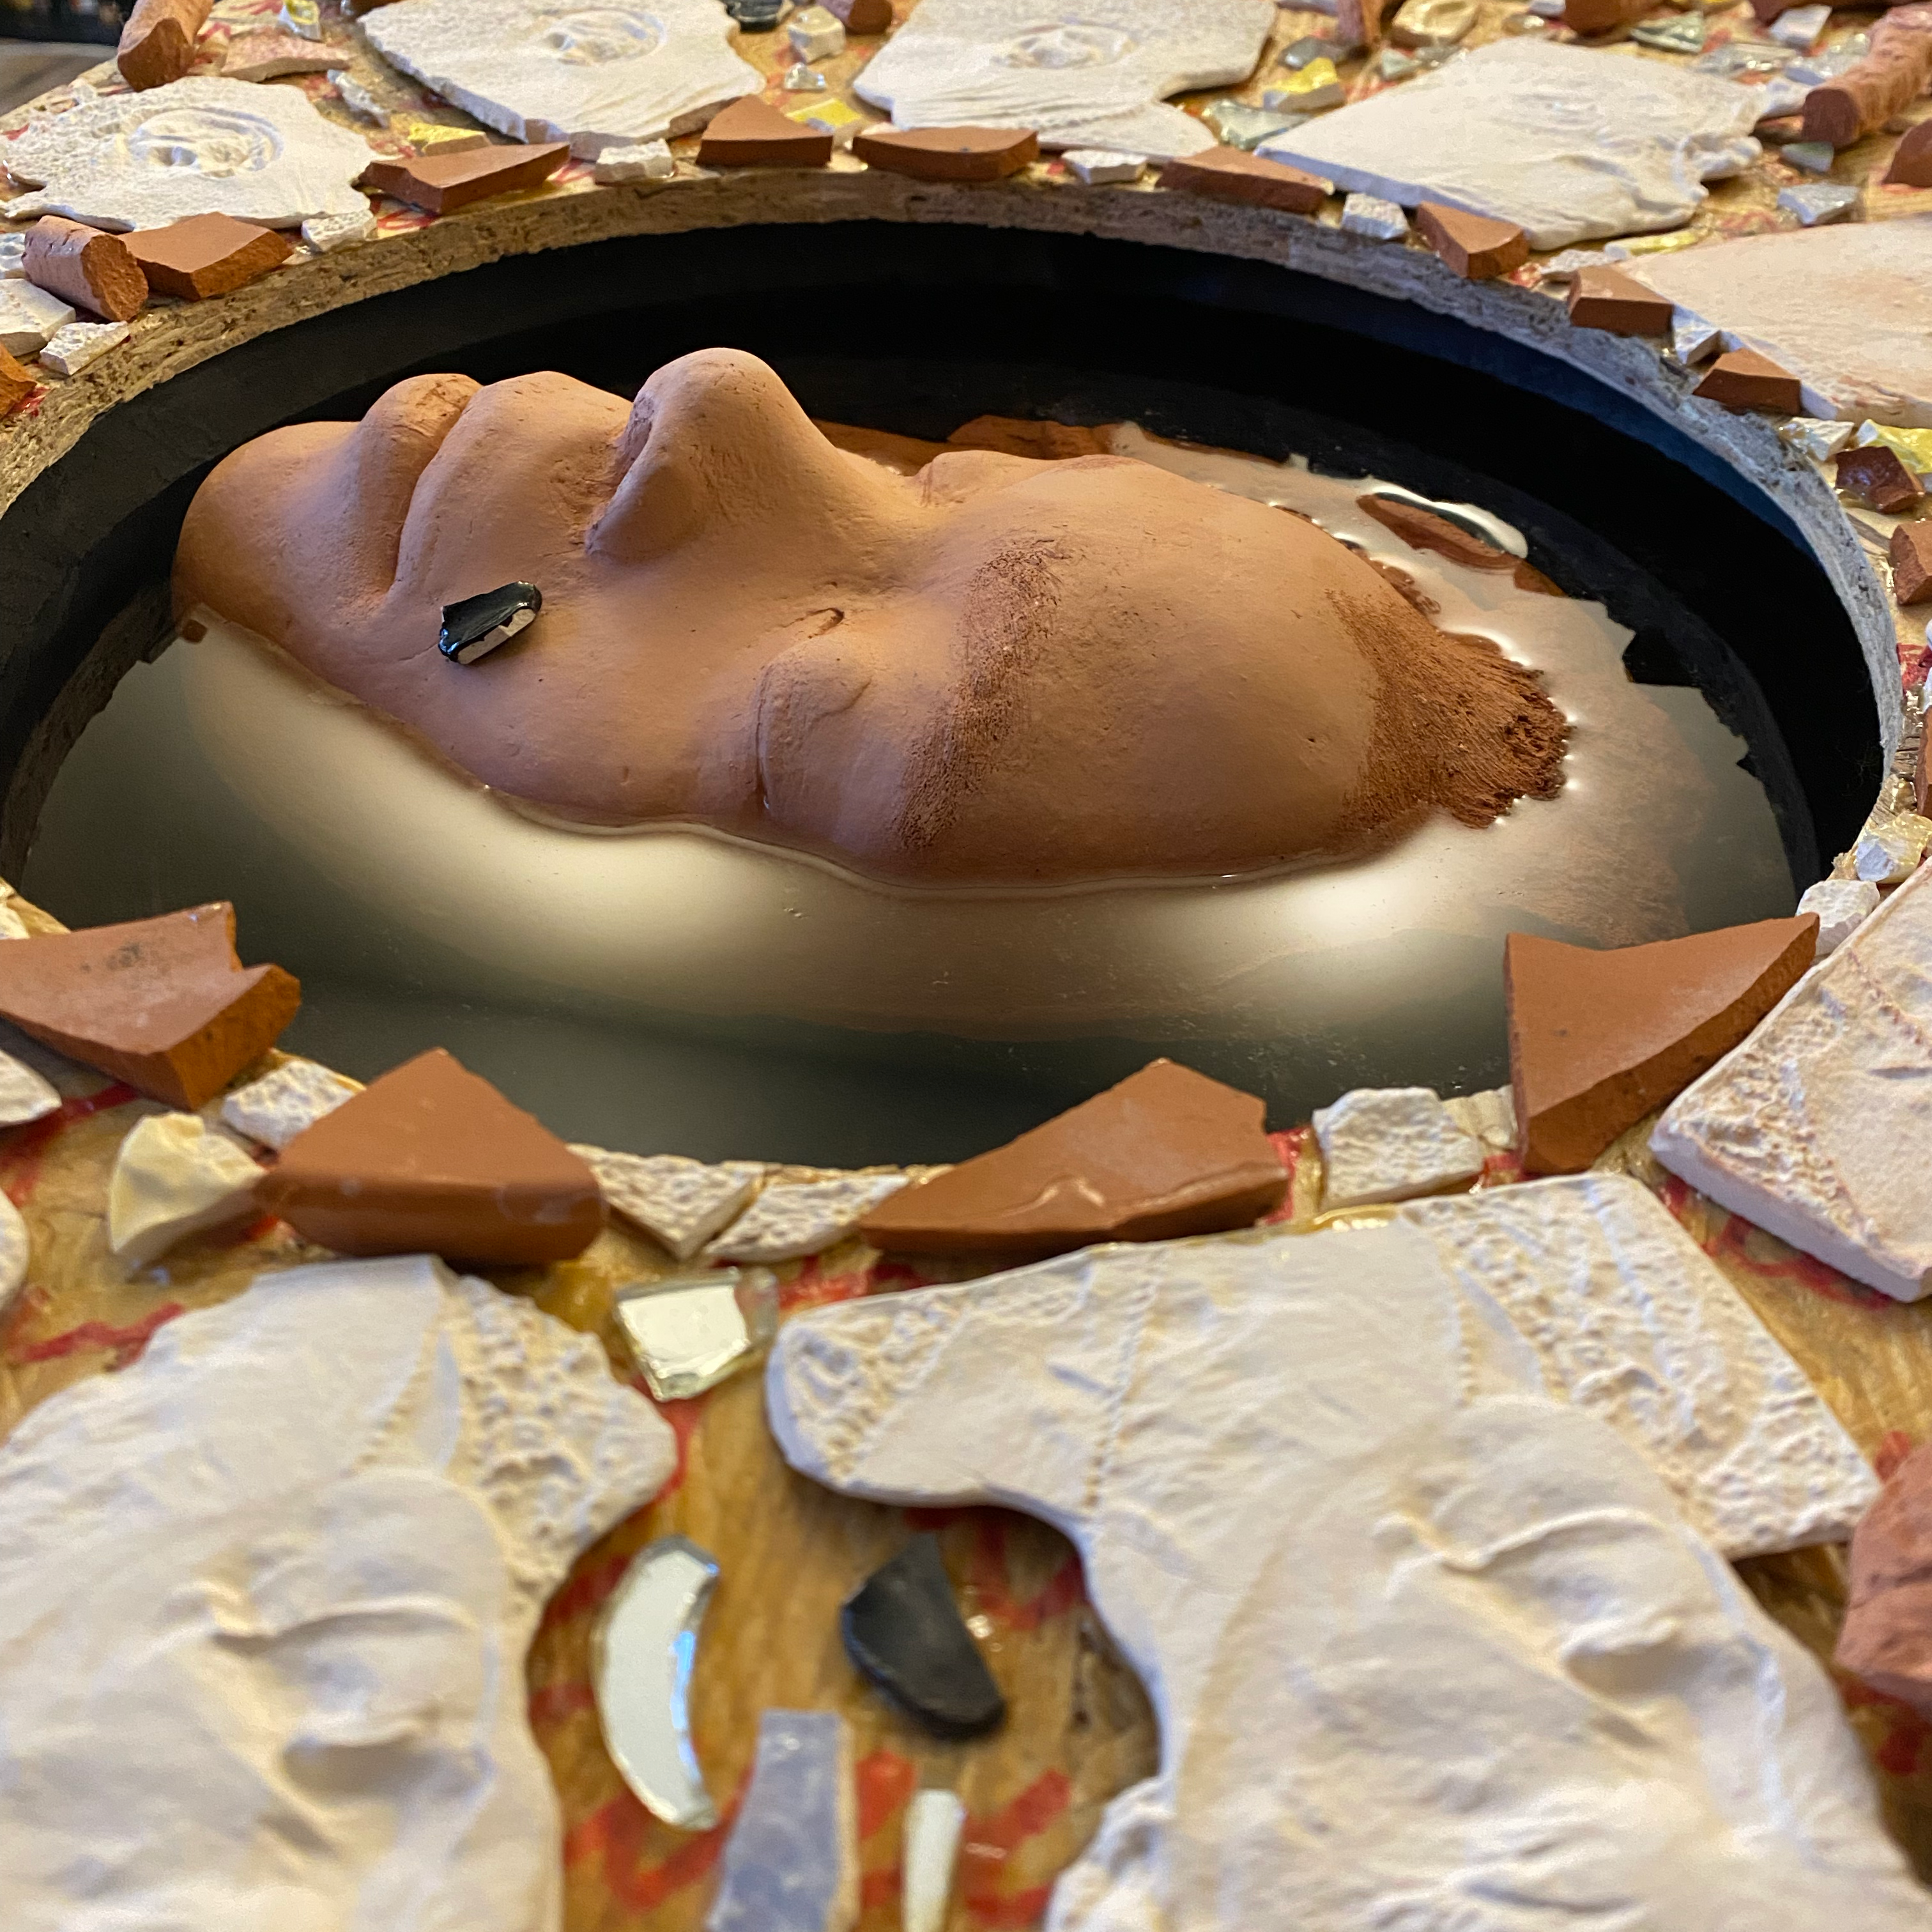 An image of the multimedia artwork of Liv Furman, featuring a clay, terracotta face partially submerged in what appears to be water or resin, surrounded by multi-colored shards of mosaic pieces.